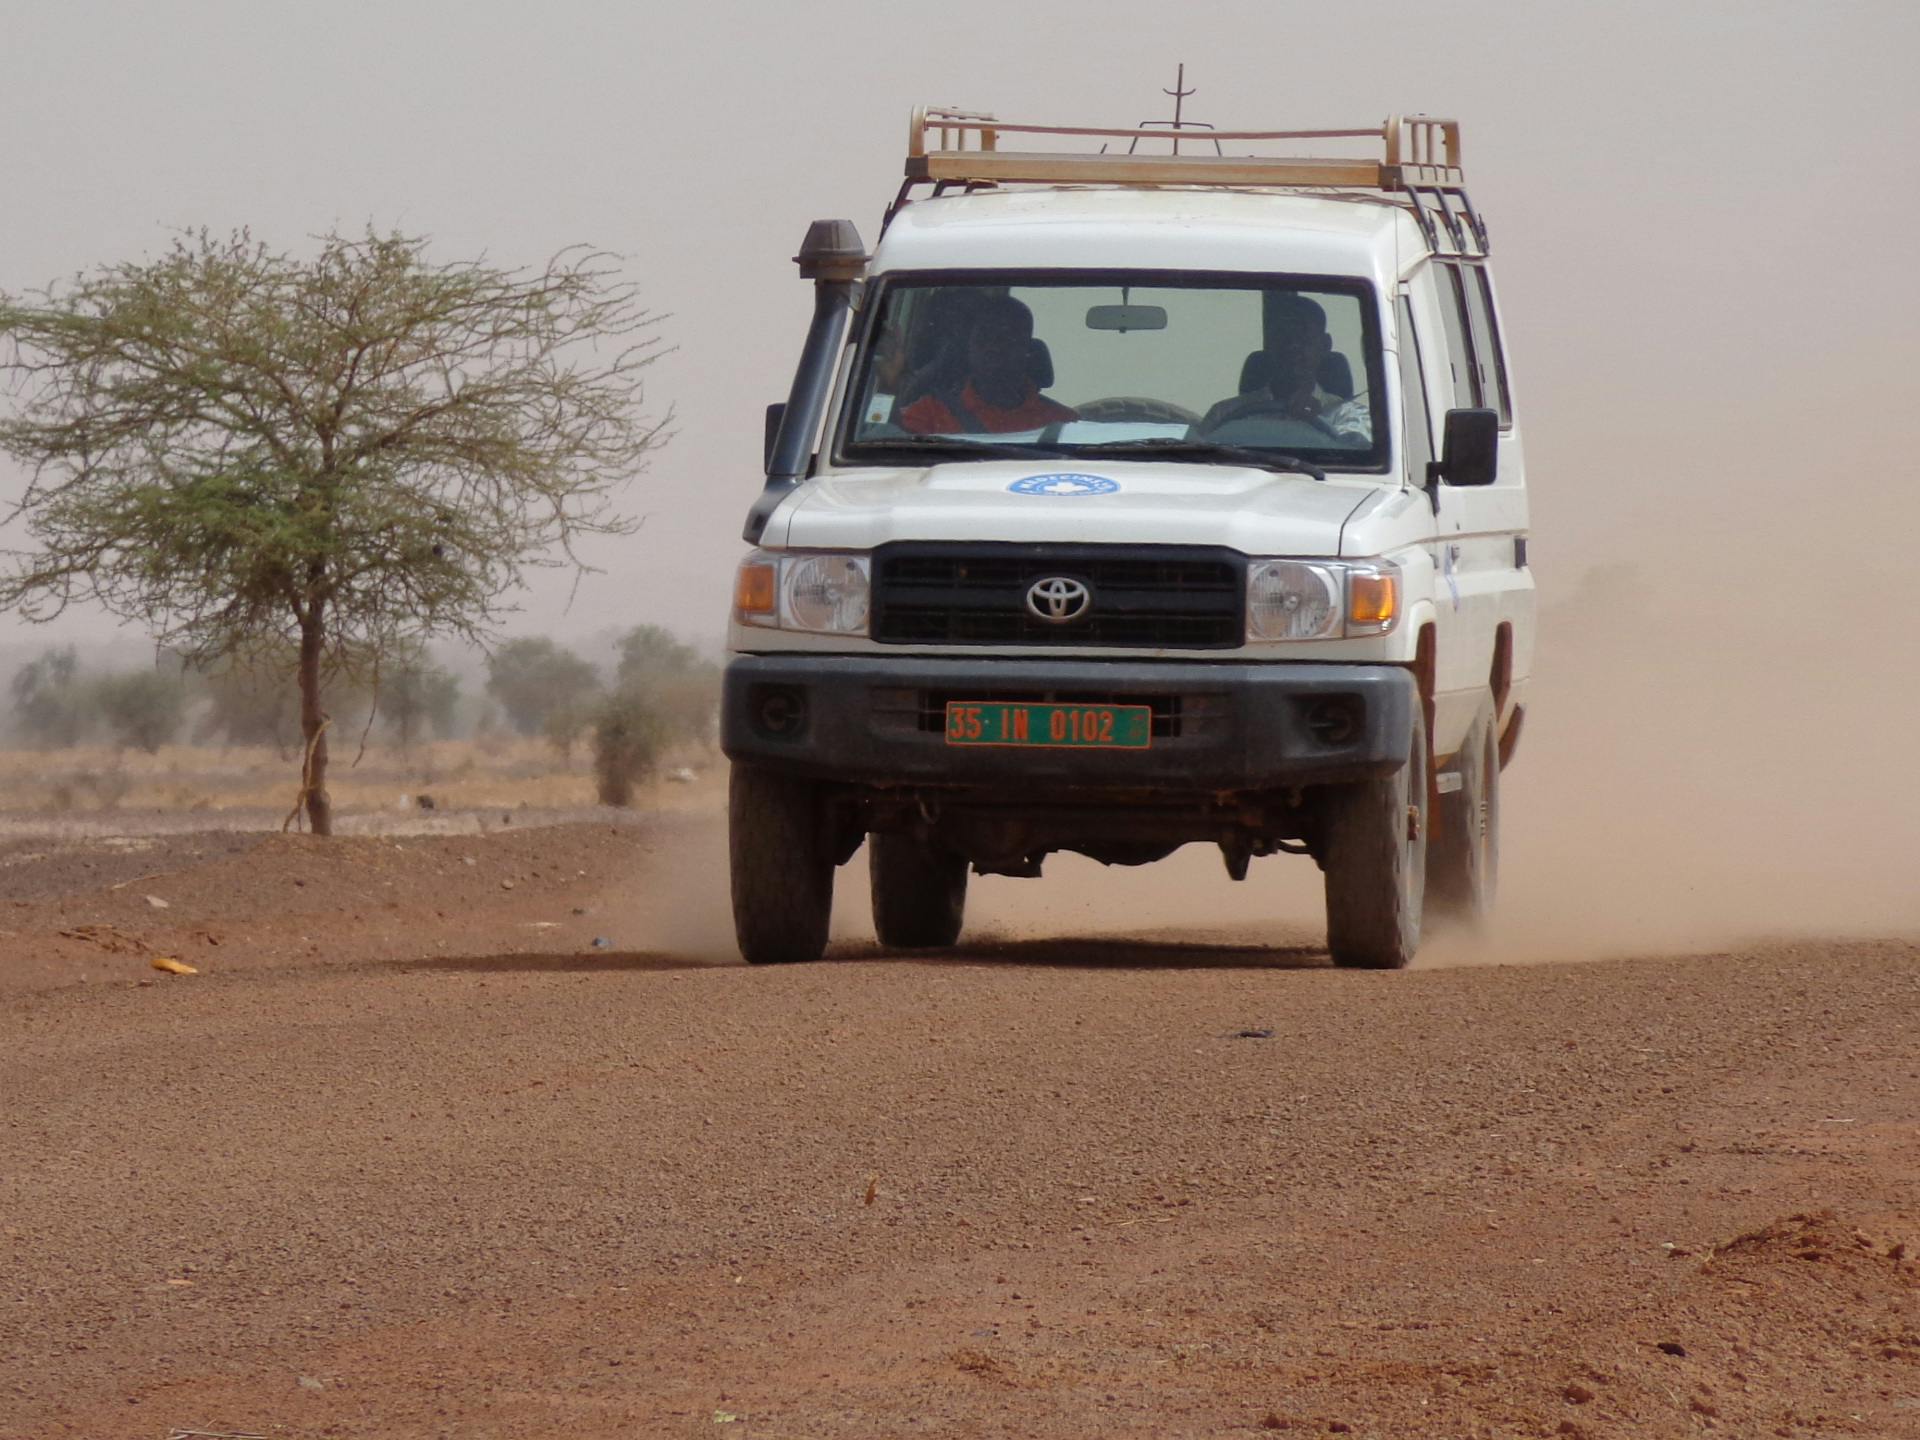 A car of a humanitarian organisation providing is driving through the dessert.